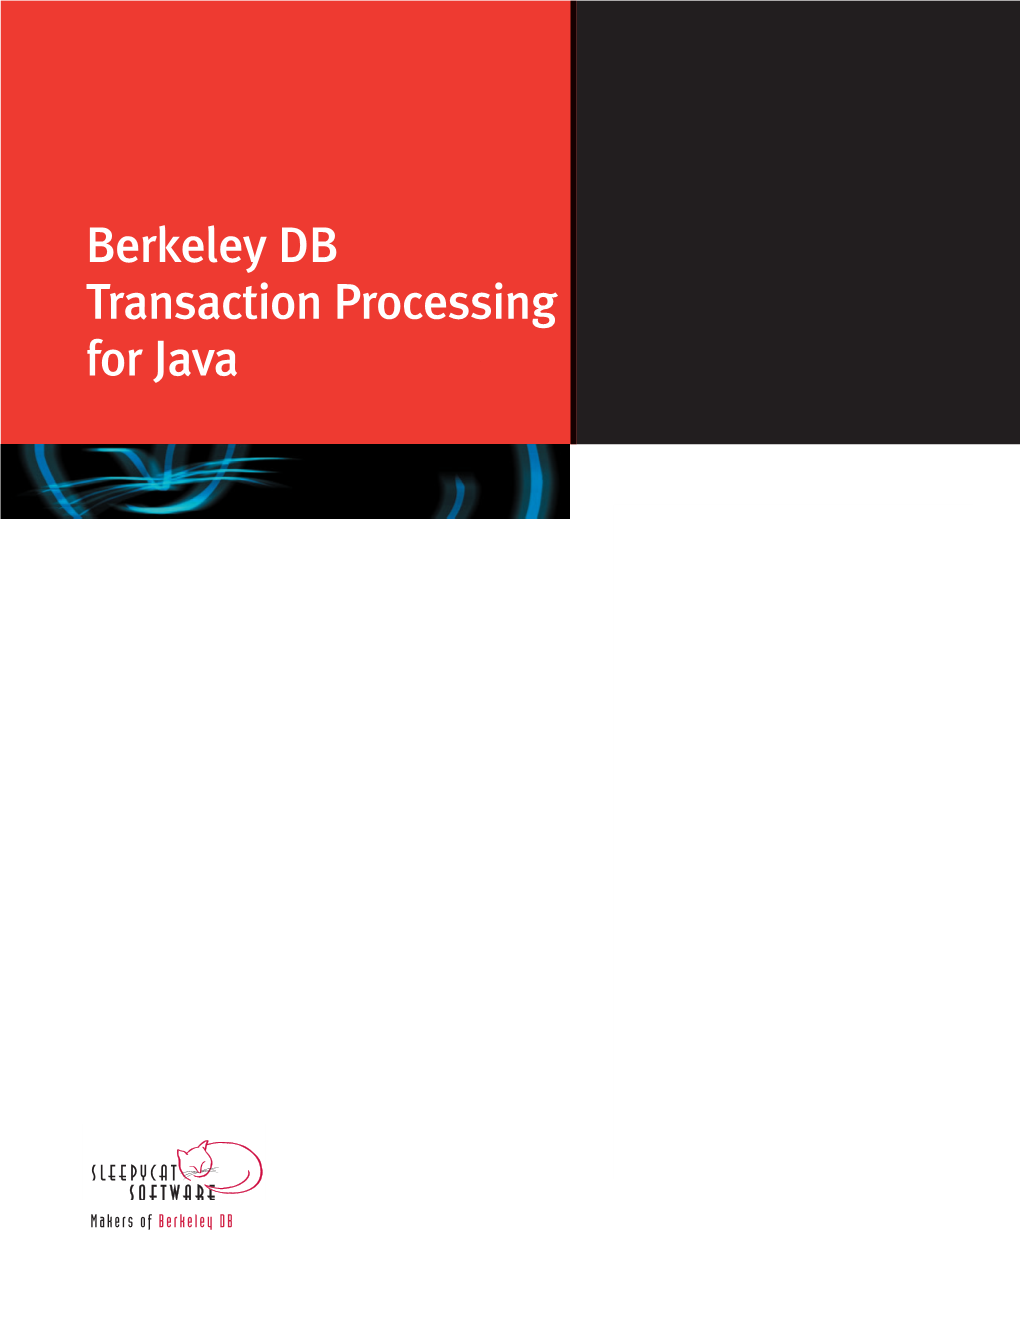 Writing Transactional Applications with Berkeley DB, Java Edition